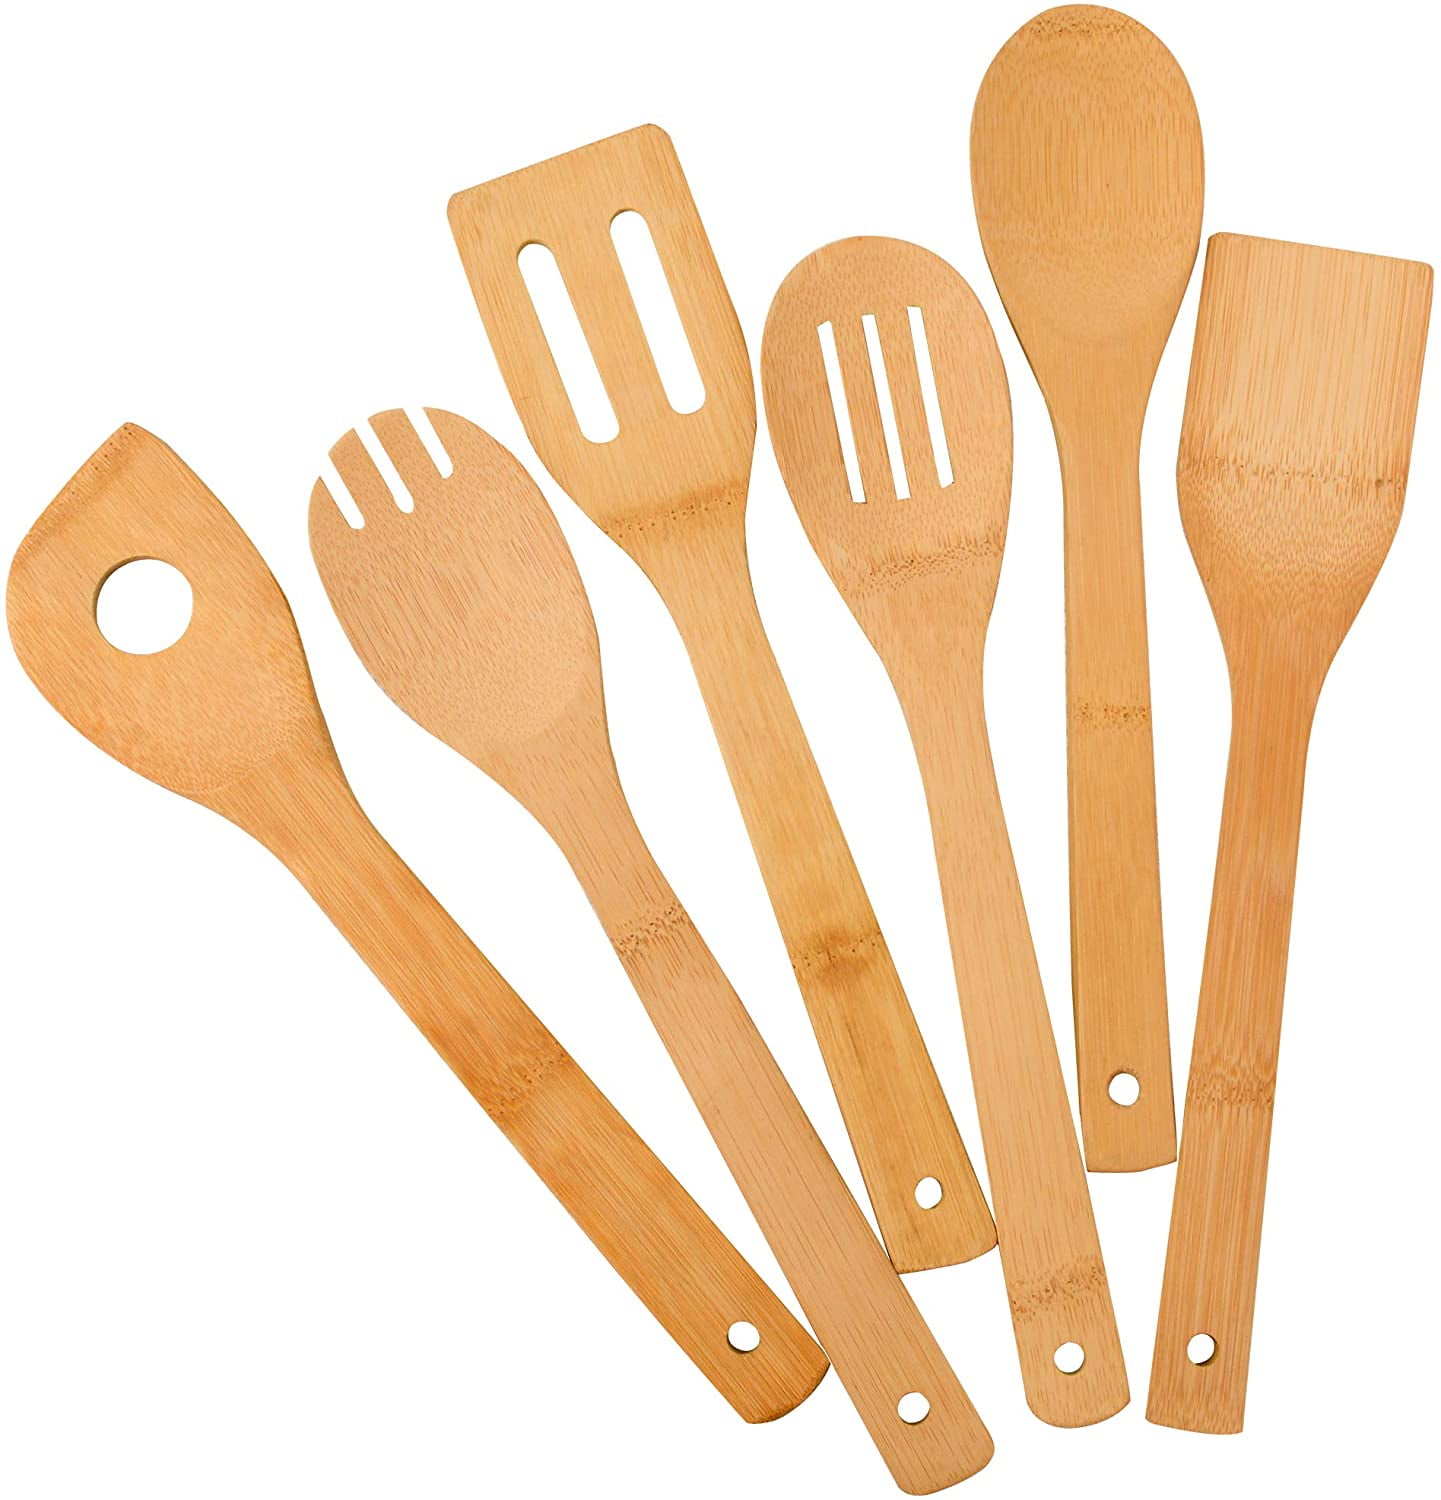 Wooden Spoons Utensil Set Kitchen Cooking Bamboo Tools Wood Spatula 